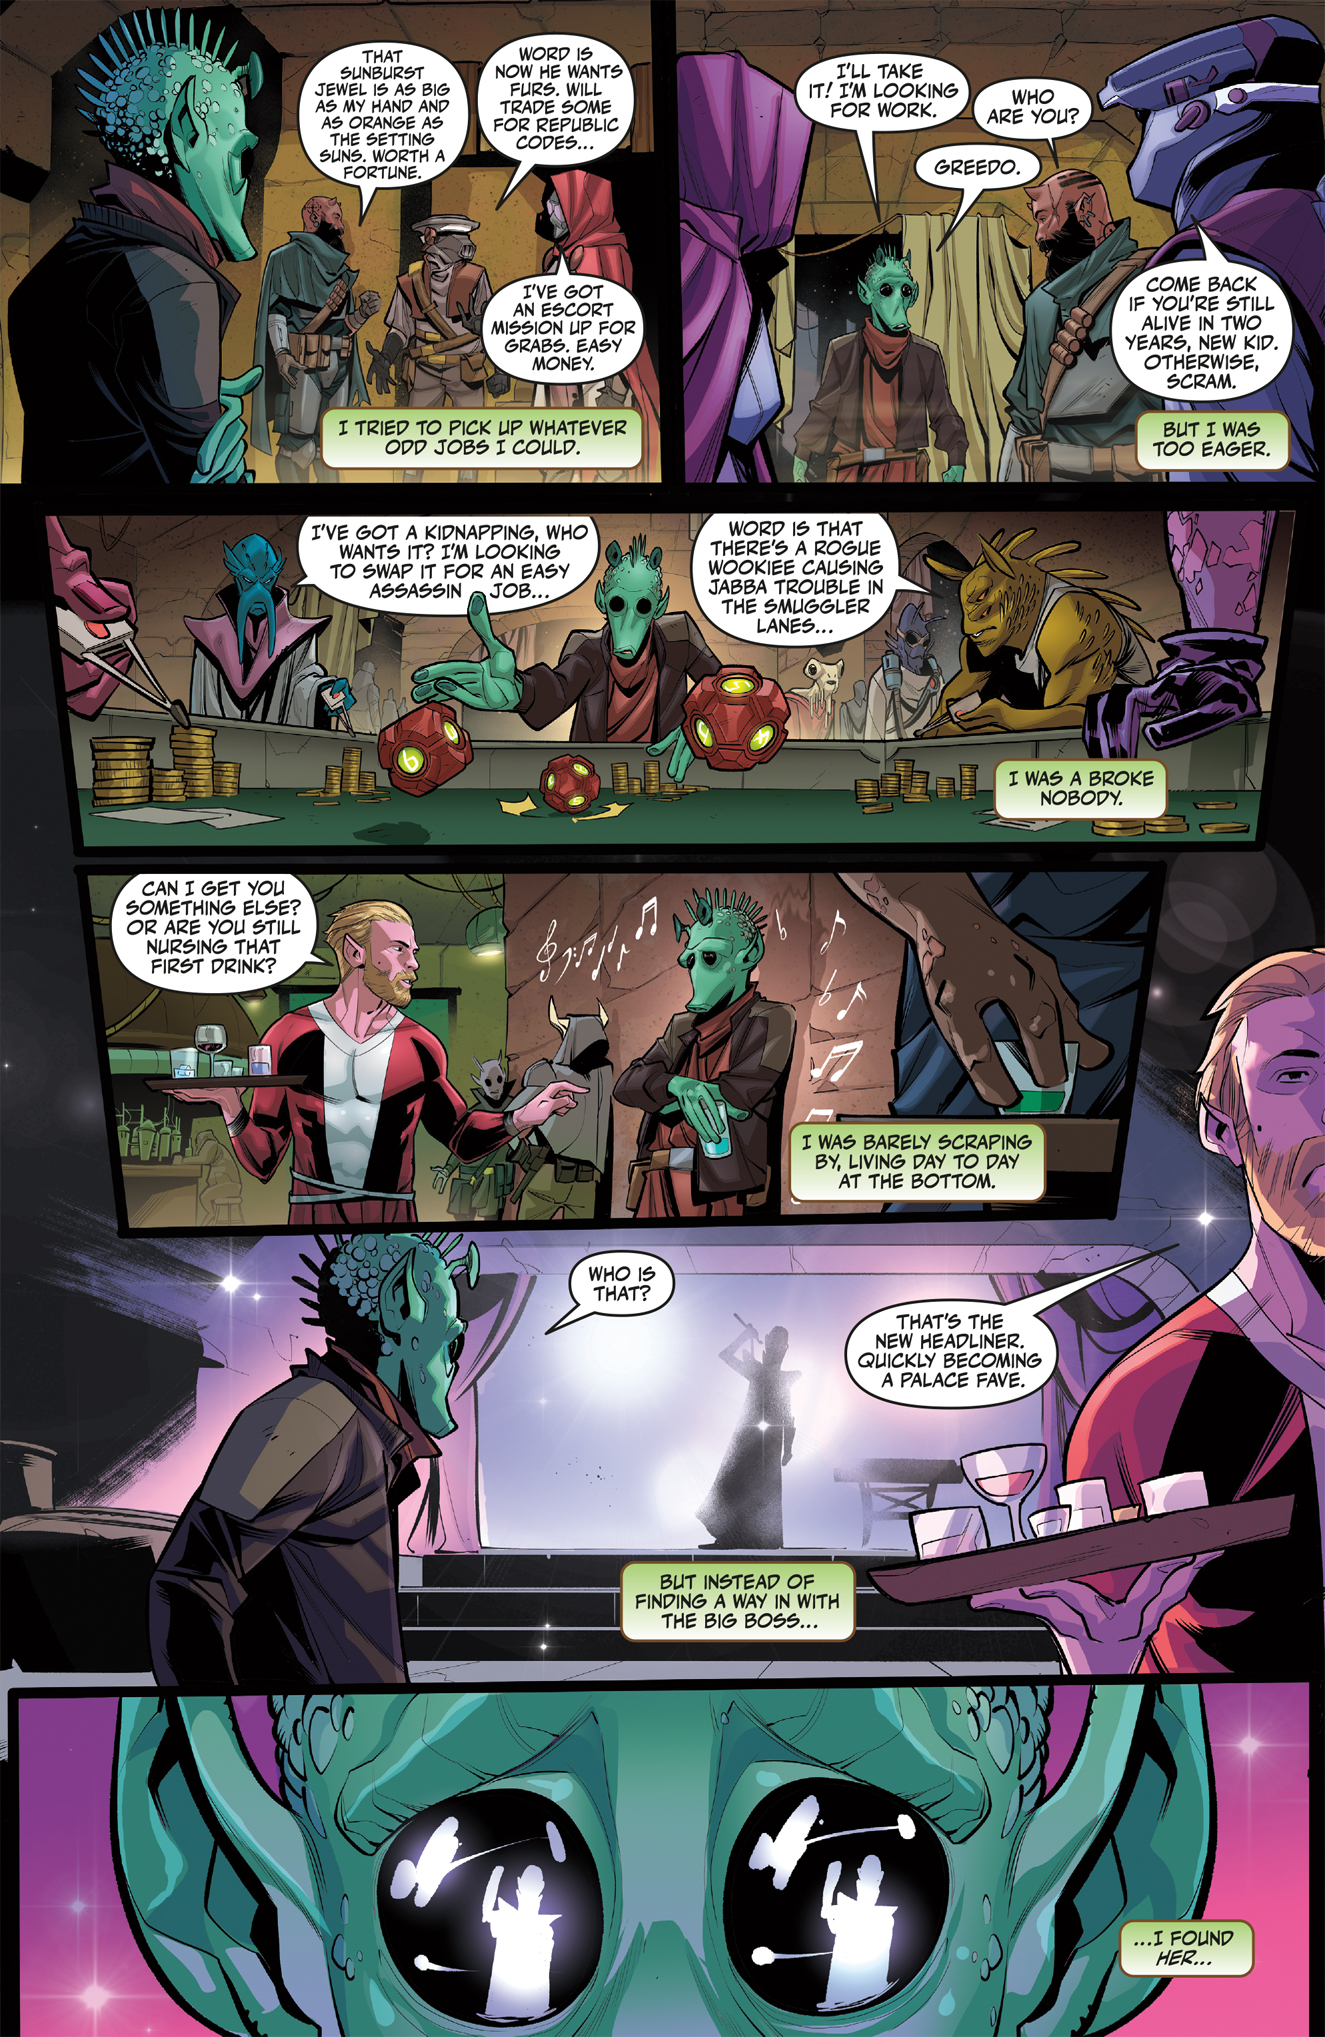 Hyperspace Stories #6 preview page